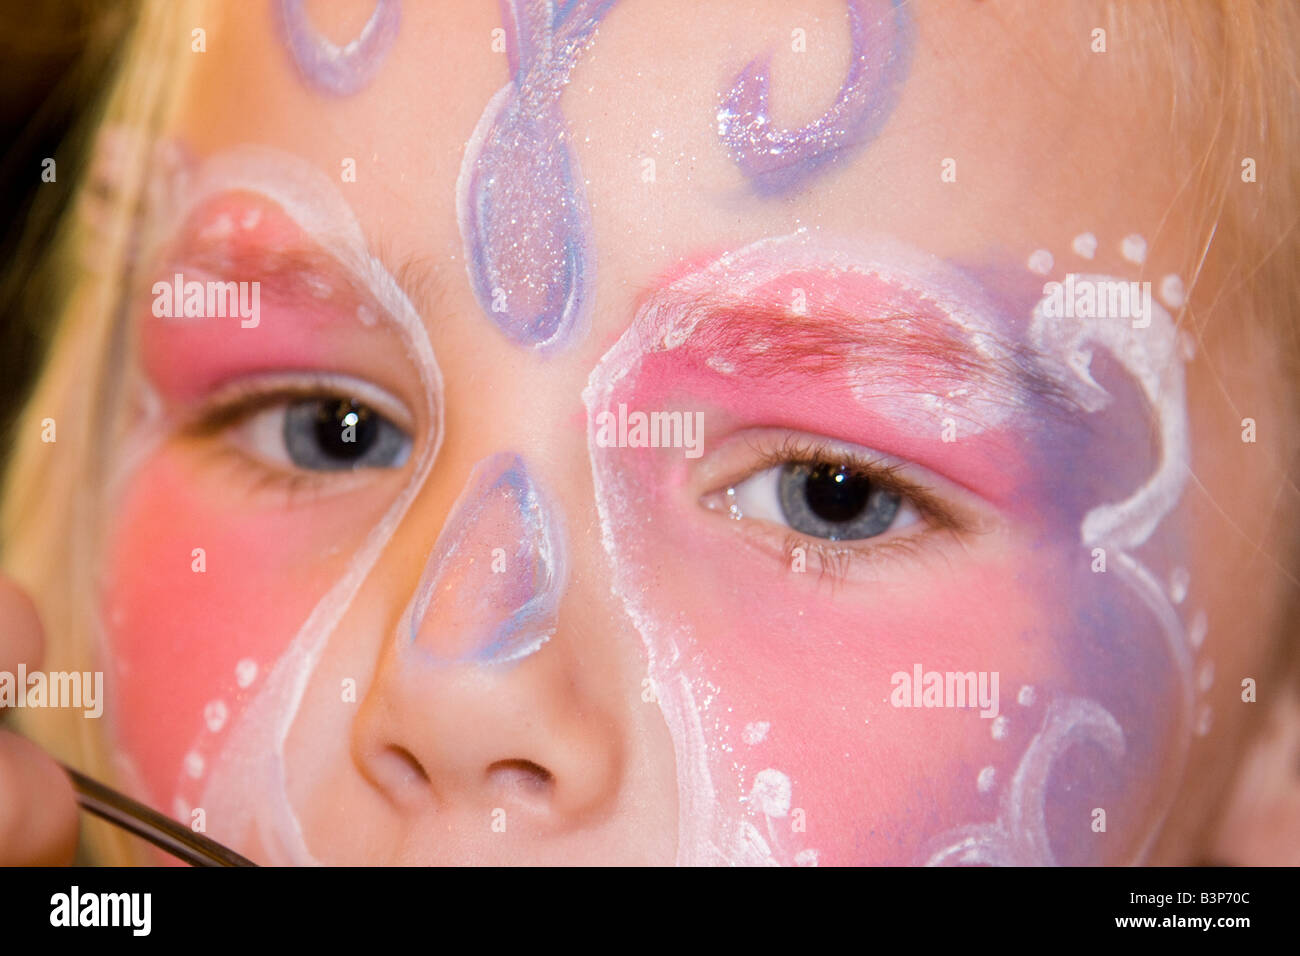 3 year old girl with face painted detail Stock Photo